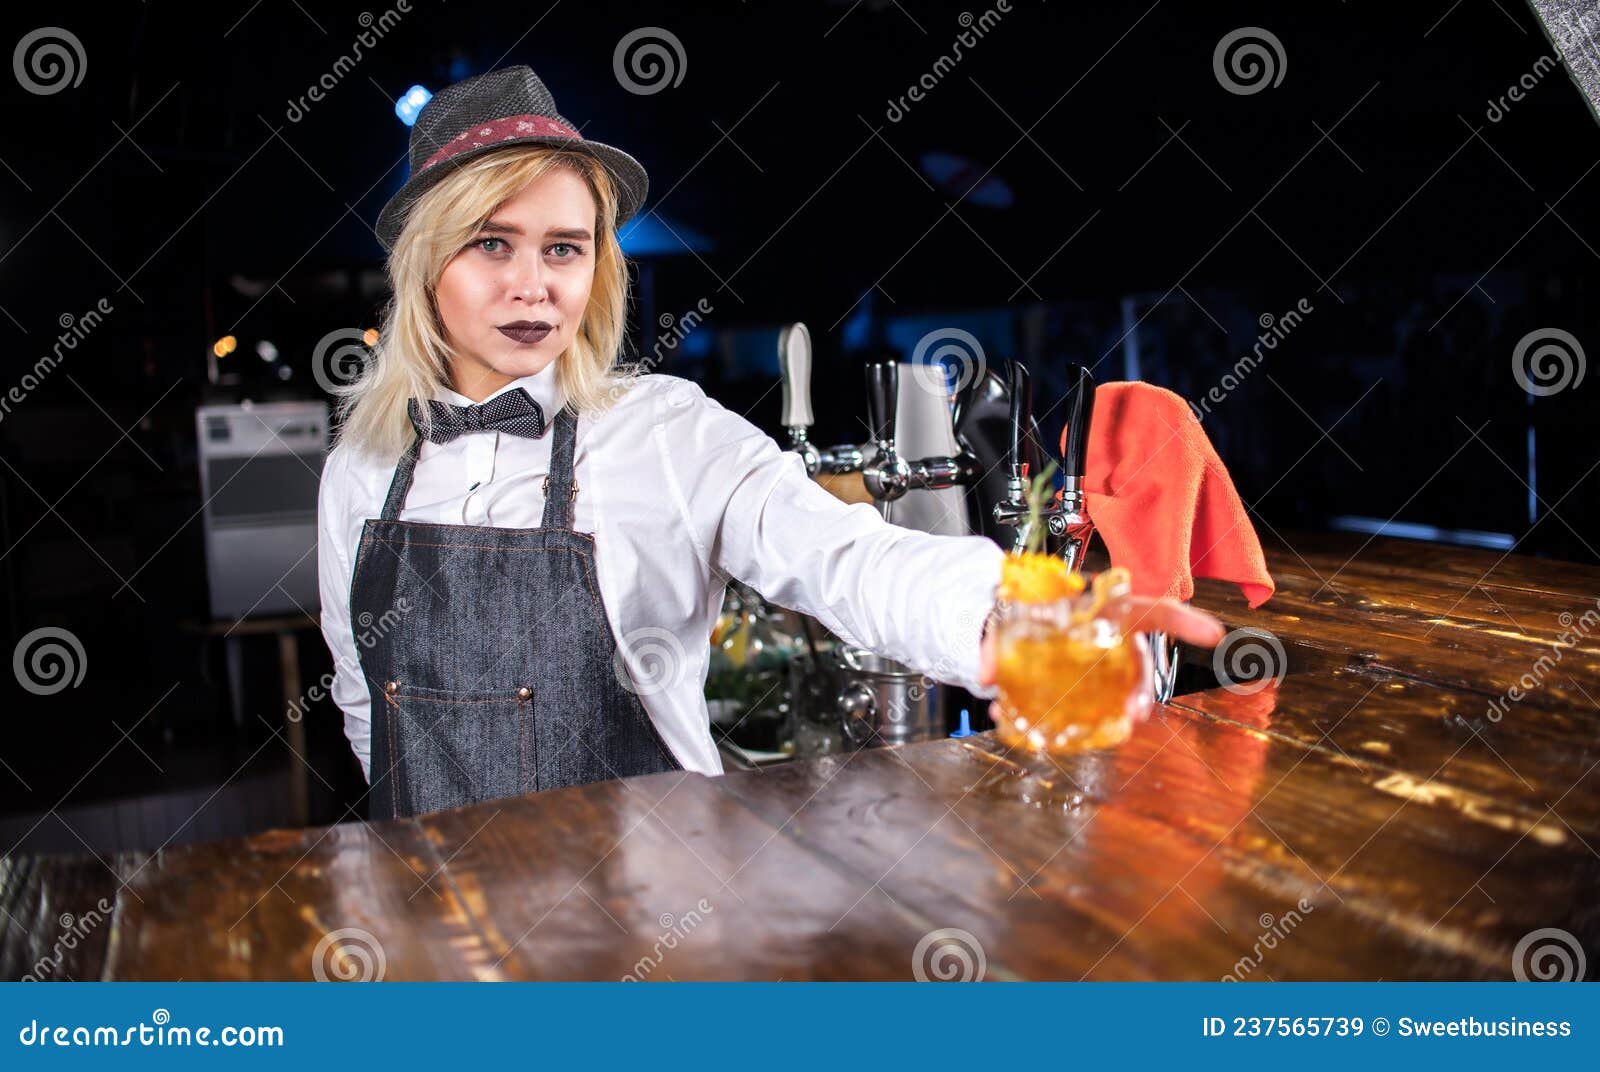 Girl Bartender Mixes a Cocktail Behind the Bar Stock Image - Image of ...